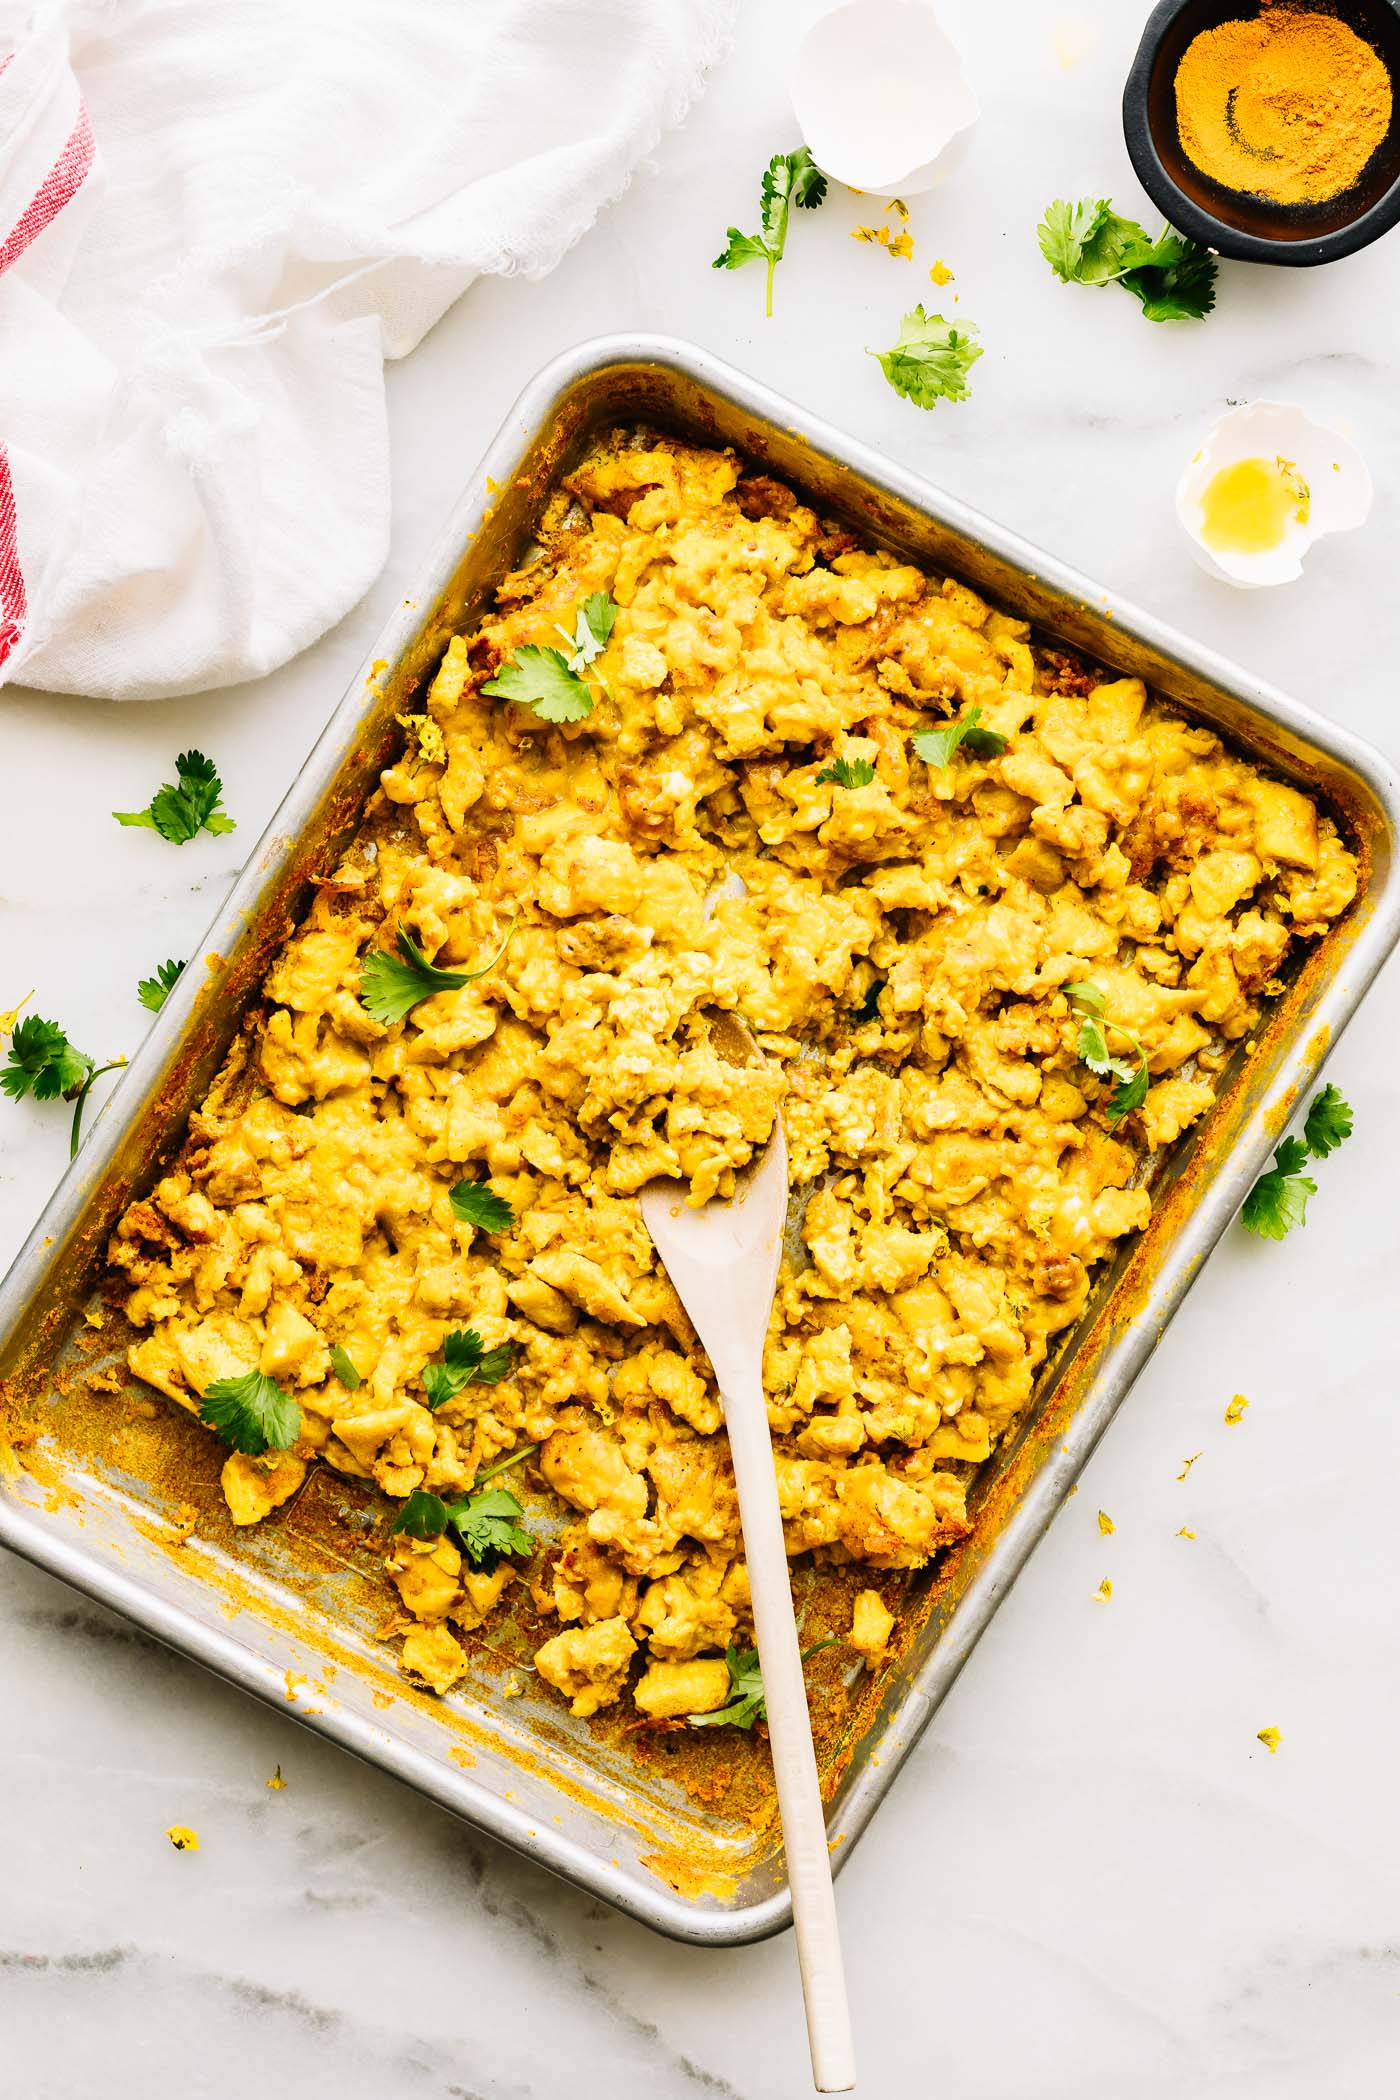 Turmeric Oven Scrambled Eggs Healthy Meal Prep Cotter Crunch,Fried Corn Recipe